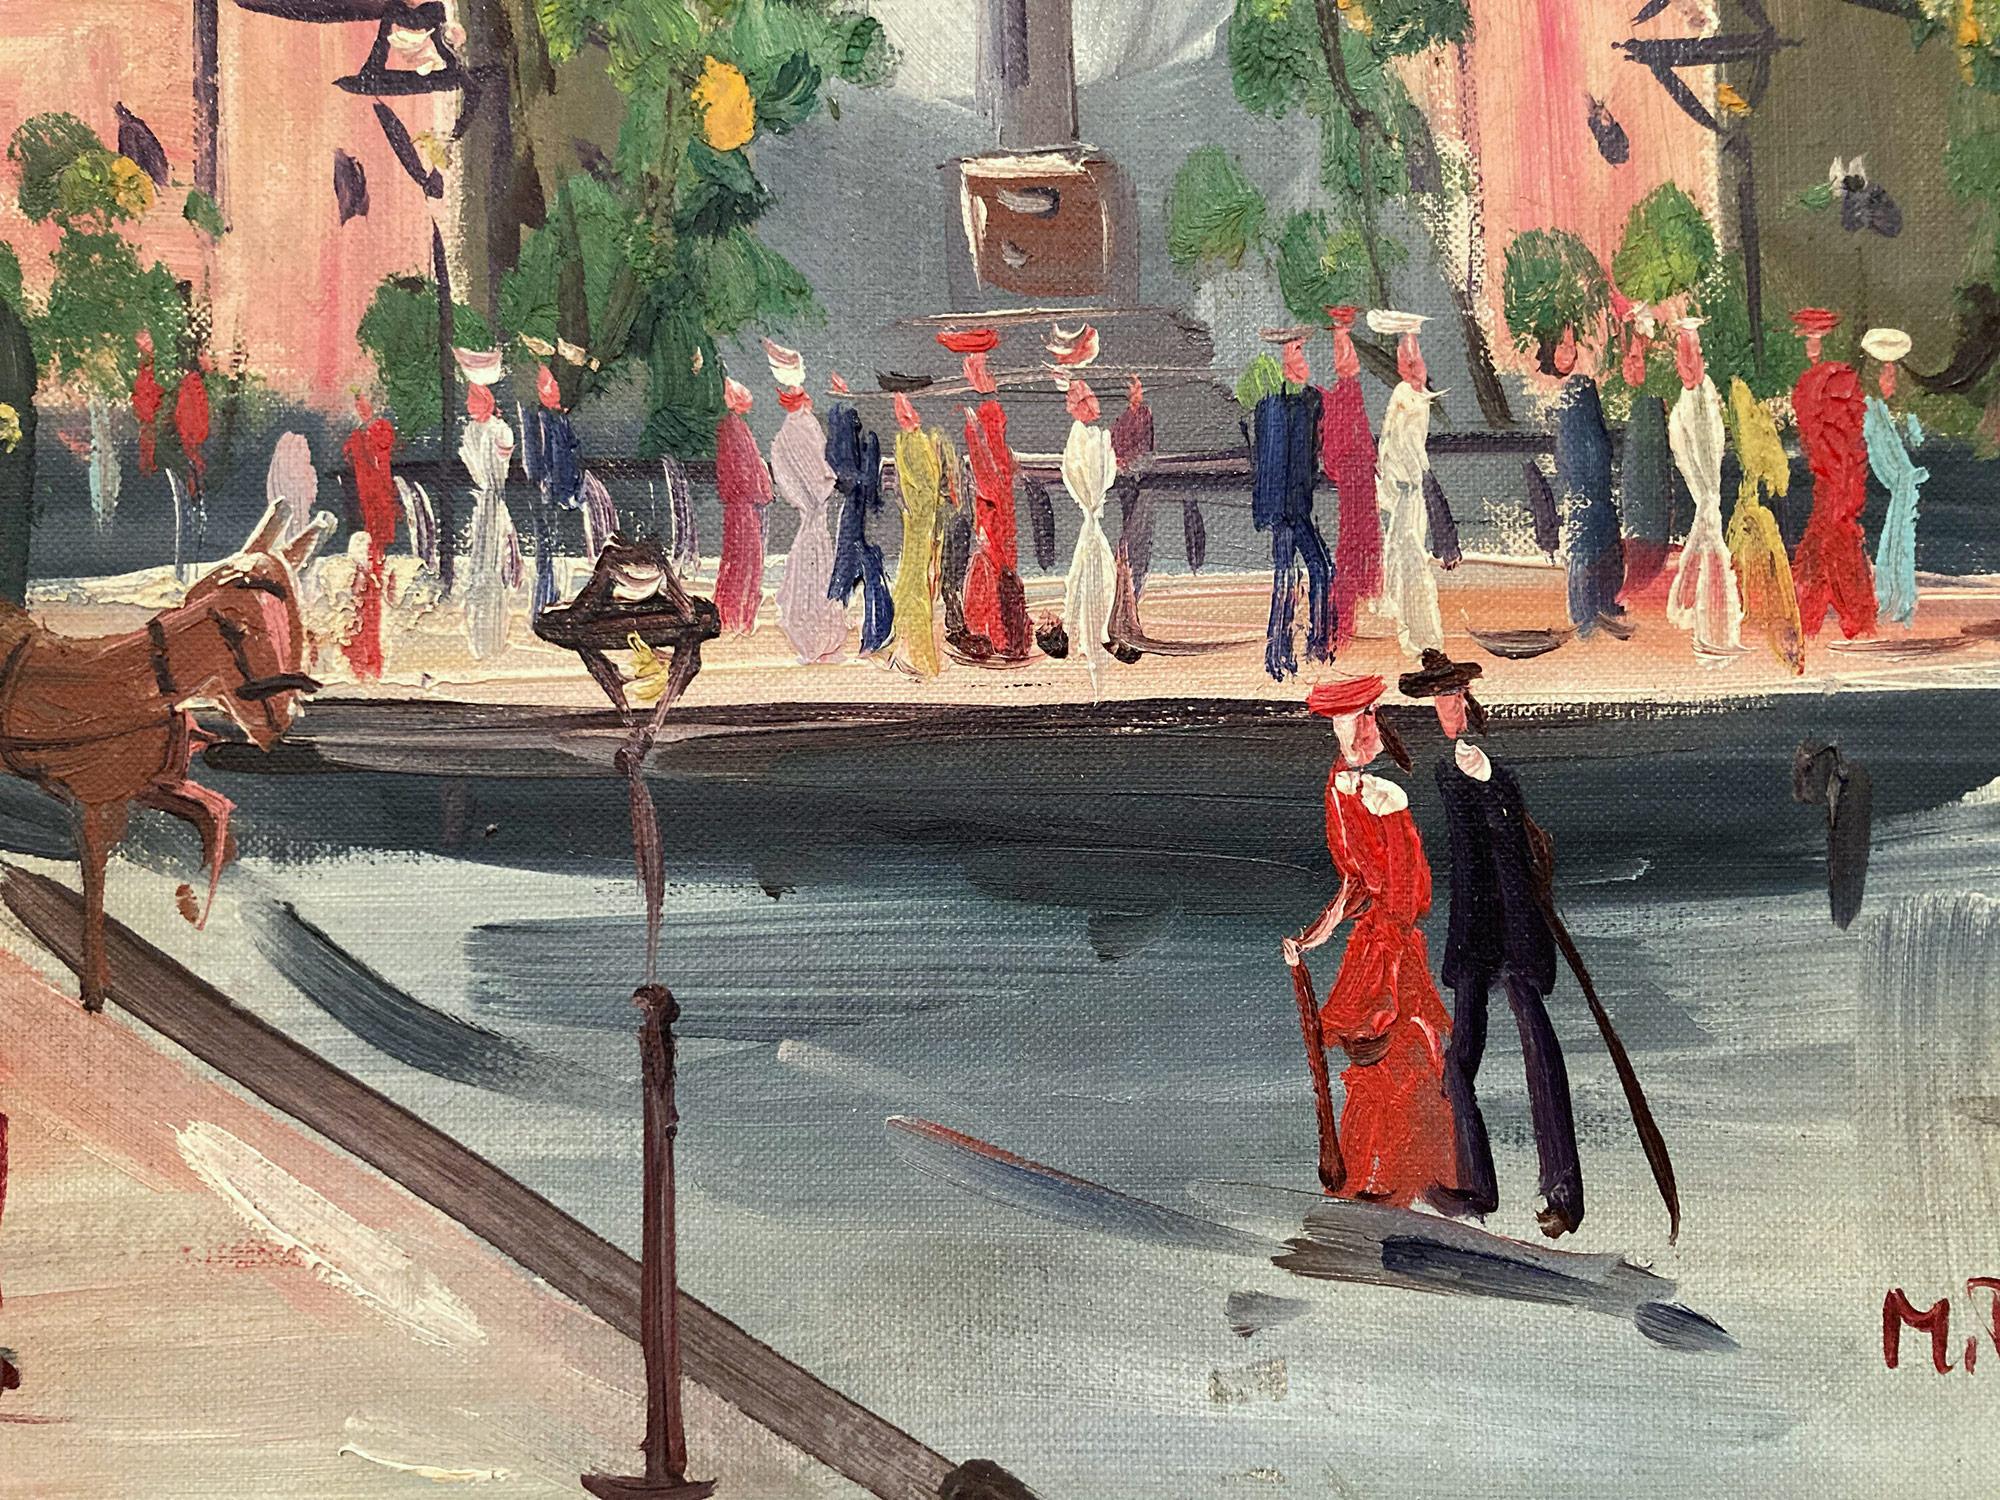 In this piece, the artist depicts his subject in an abstract and impressionistic way, capturing the Place de la Bastille busy street scene from the 20th Century with much life. The artist mostly used oil with a pallet knife, with impasto paint, and